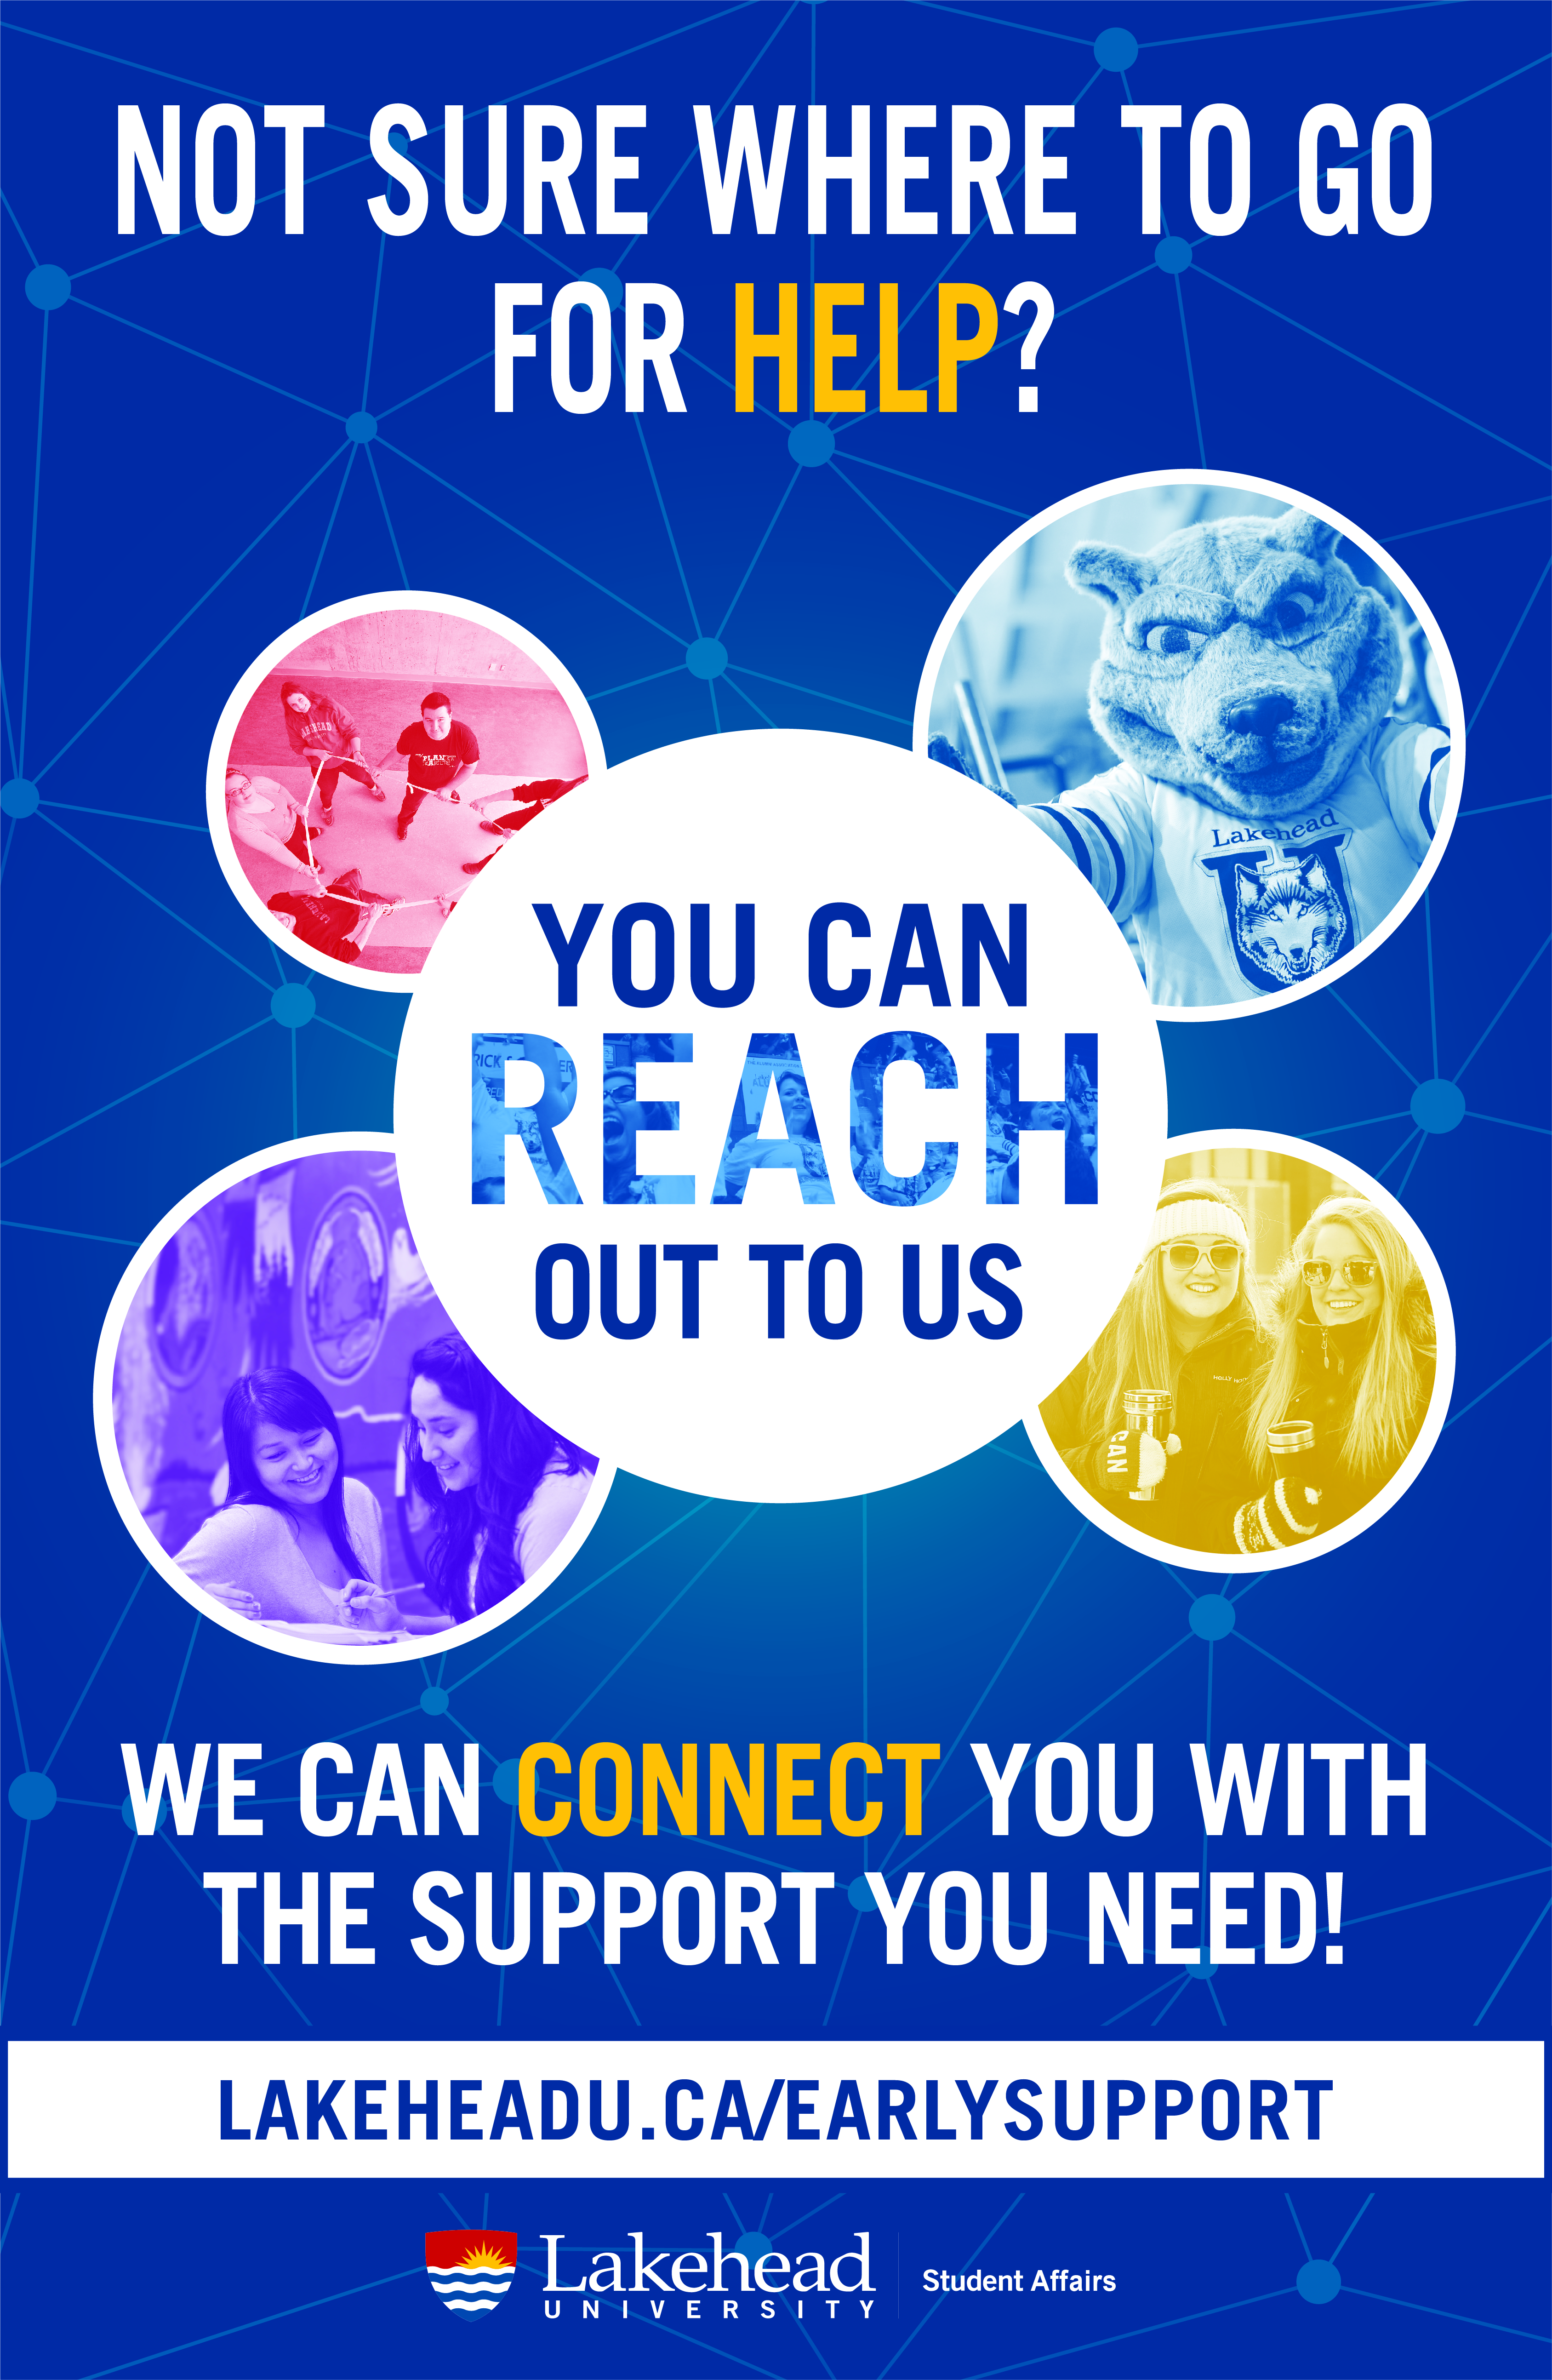 Not sure where to go for help? You can reach out to us. We can connect you with the support you need!